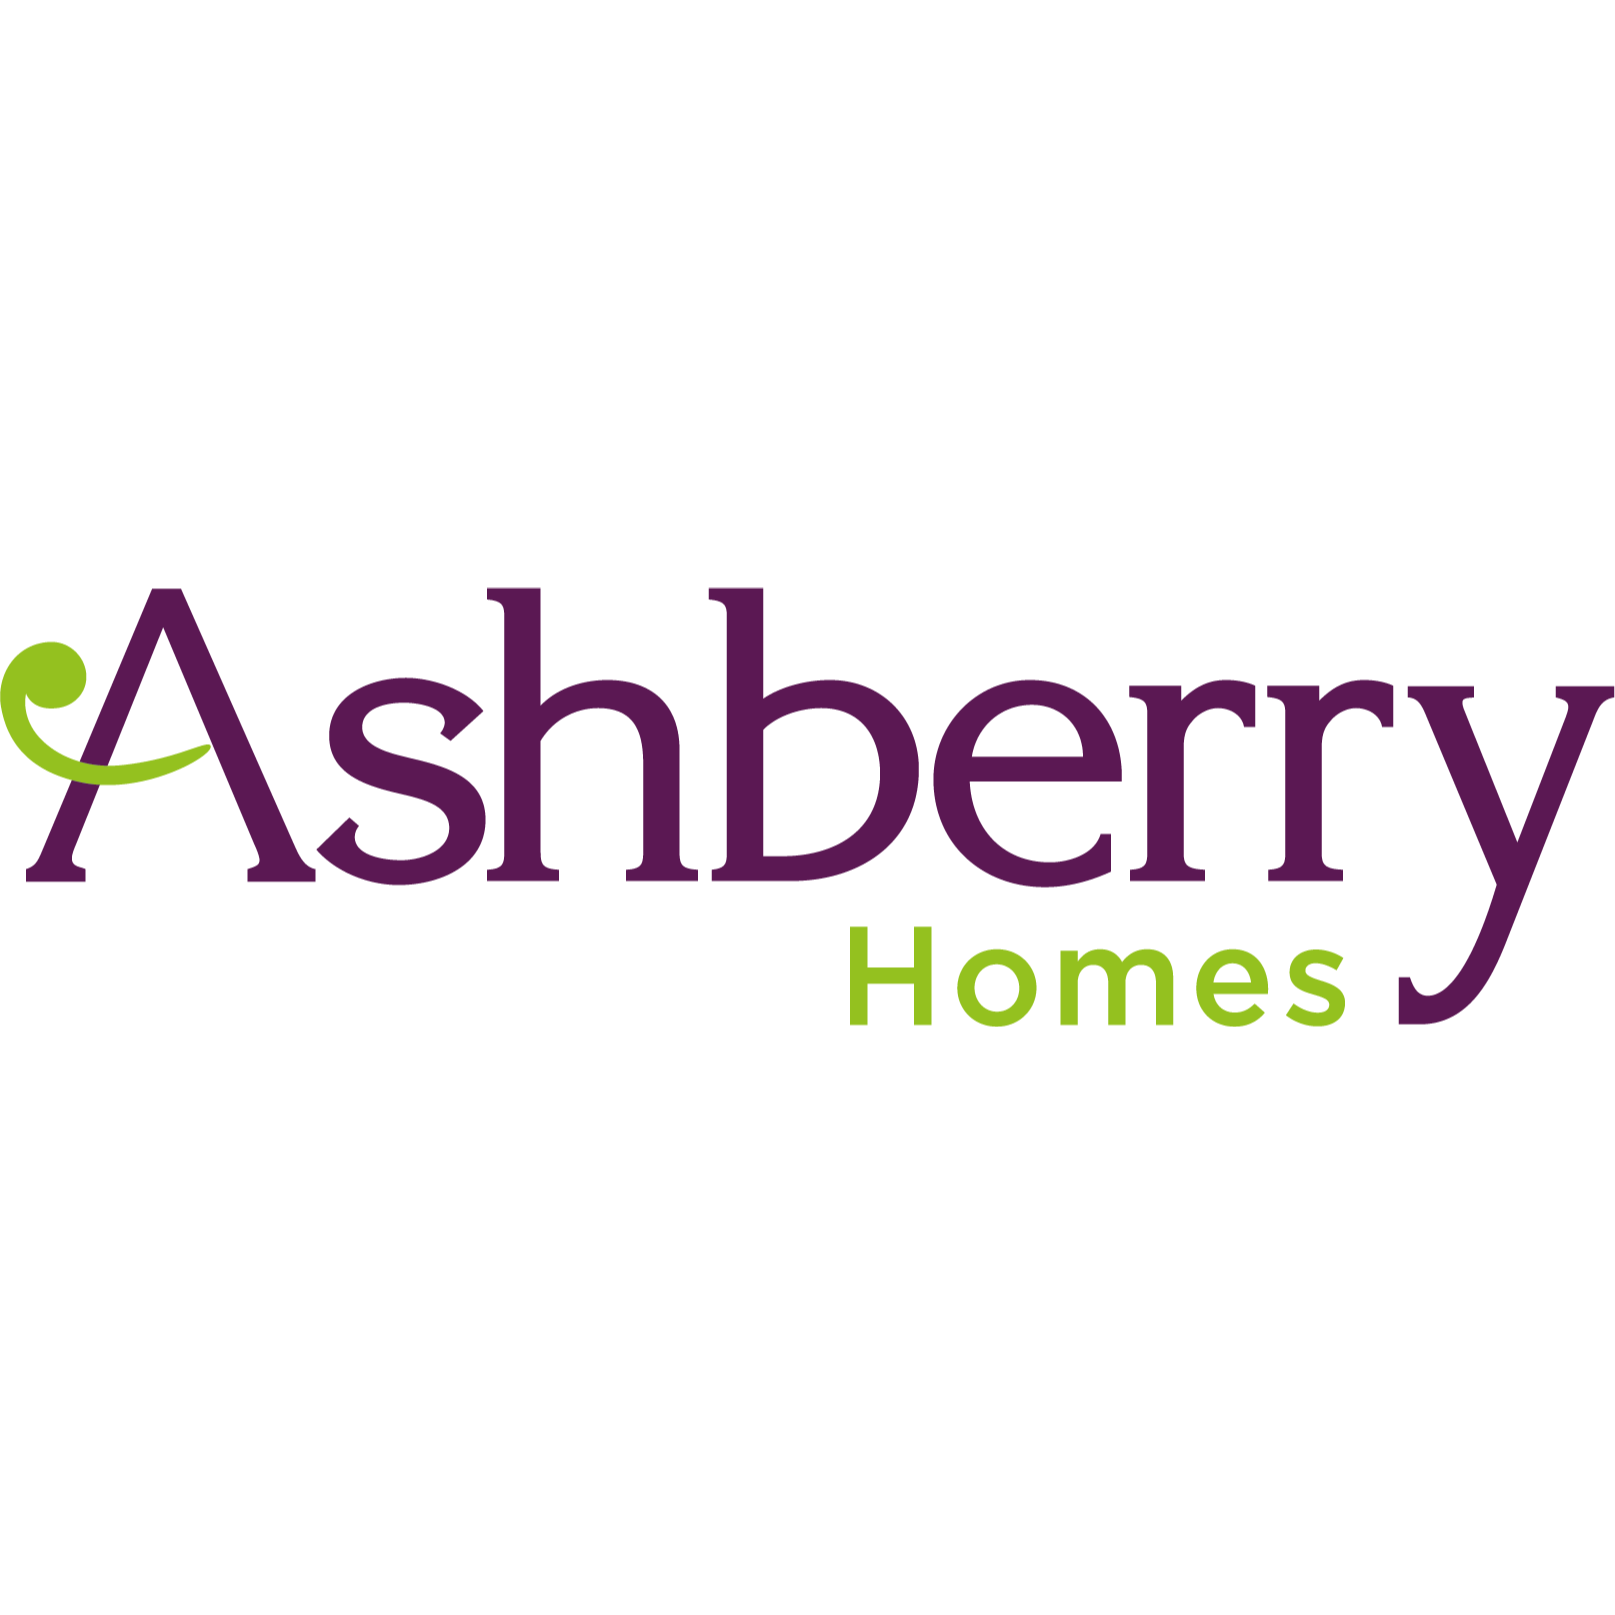 Ashberry Homes - Stargate Meadows - Ryton, Tyne and Wear NE40 3NL - 01916 225169 | ShowMeLocal.com